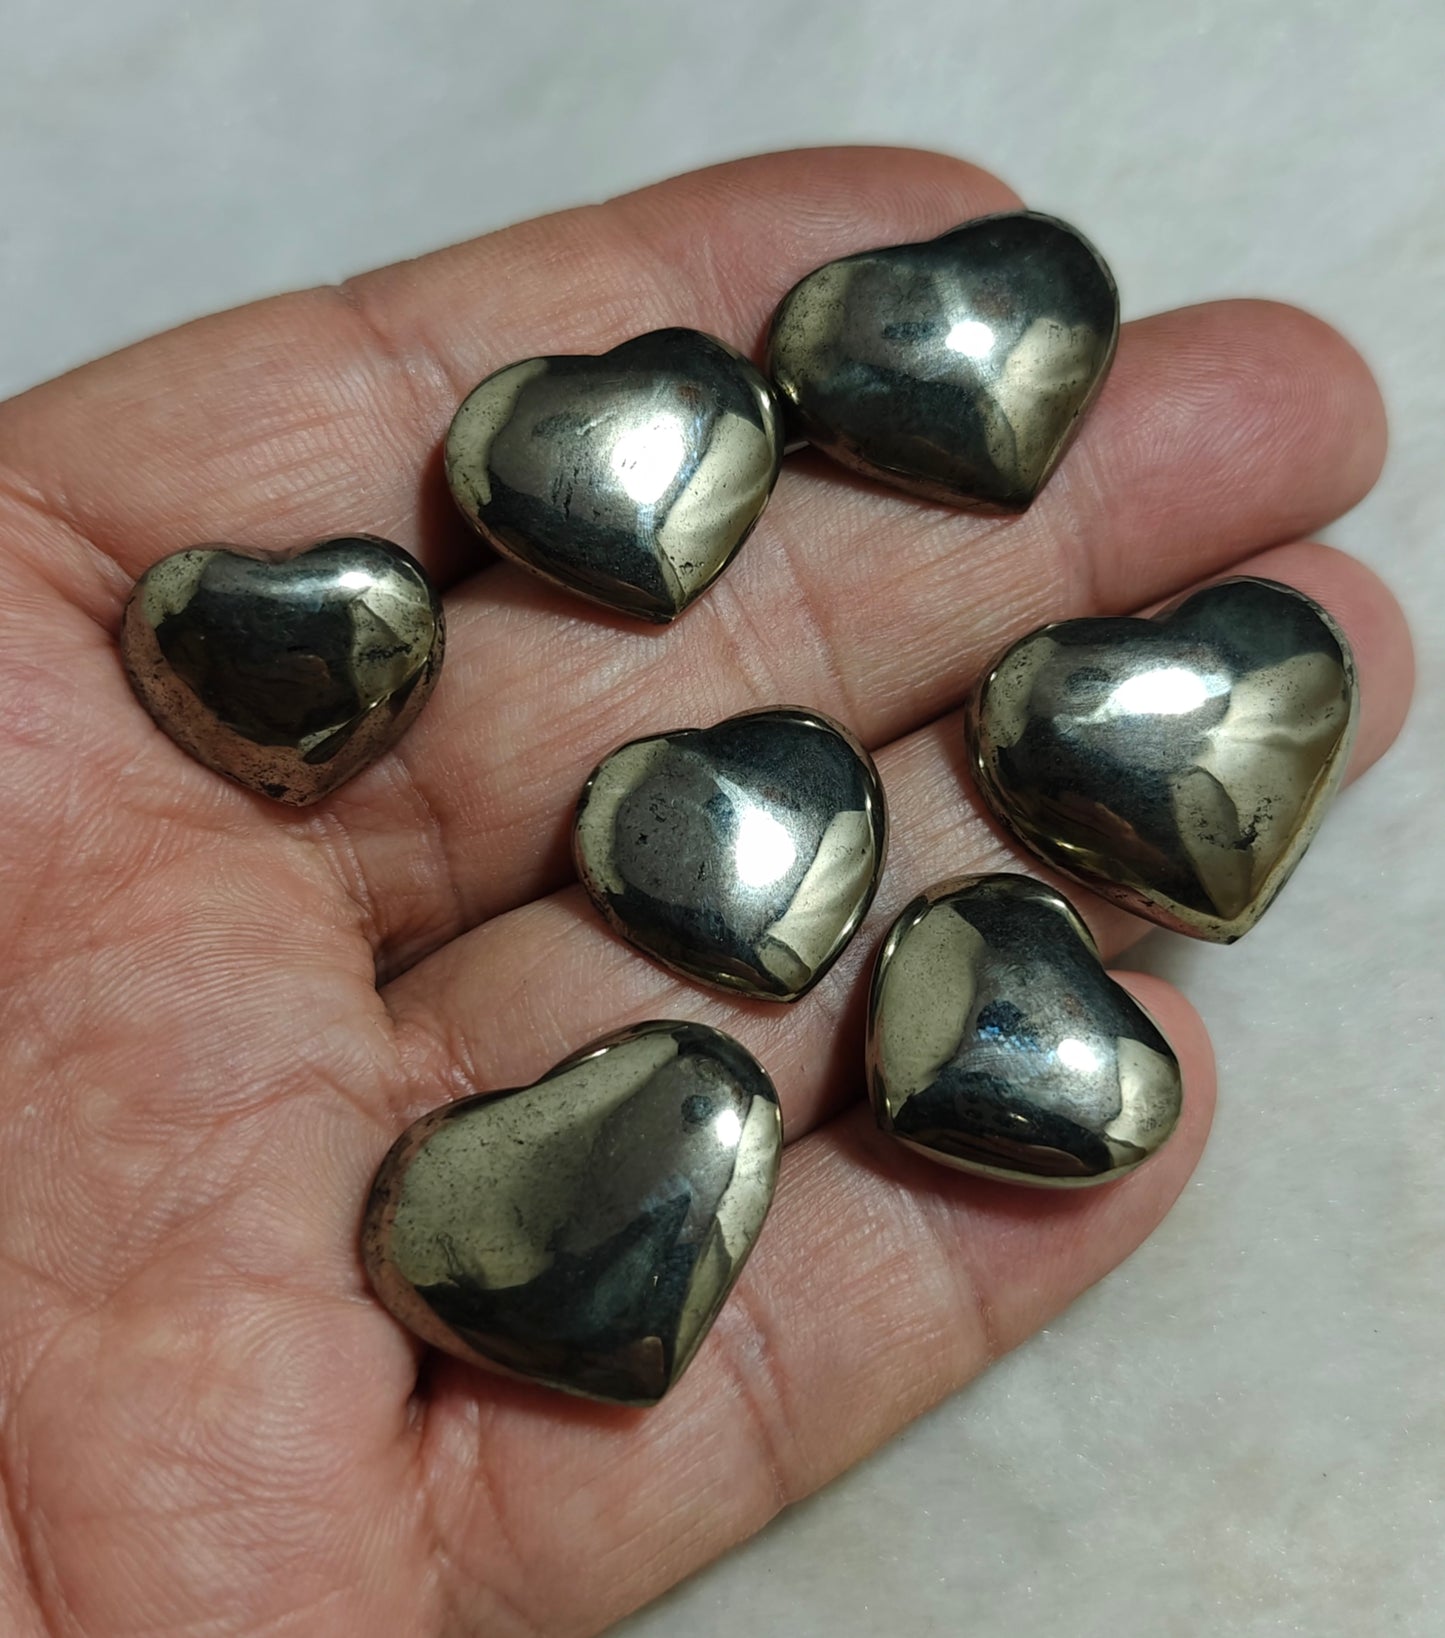 7 pyrite carvings heart shapes